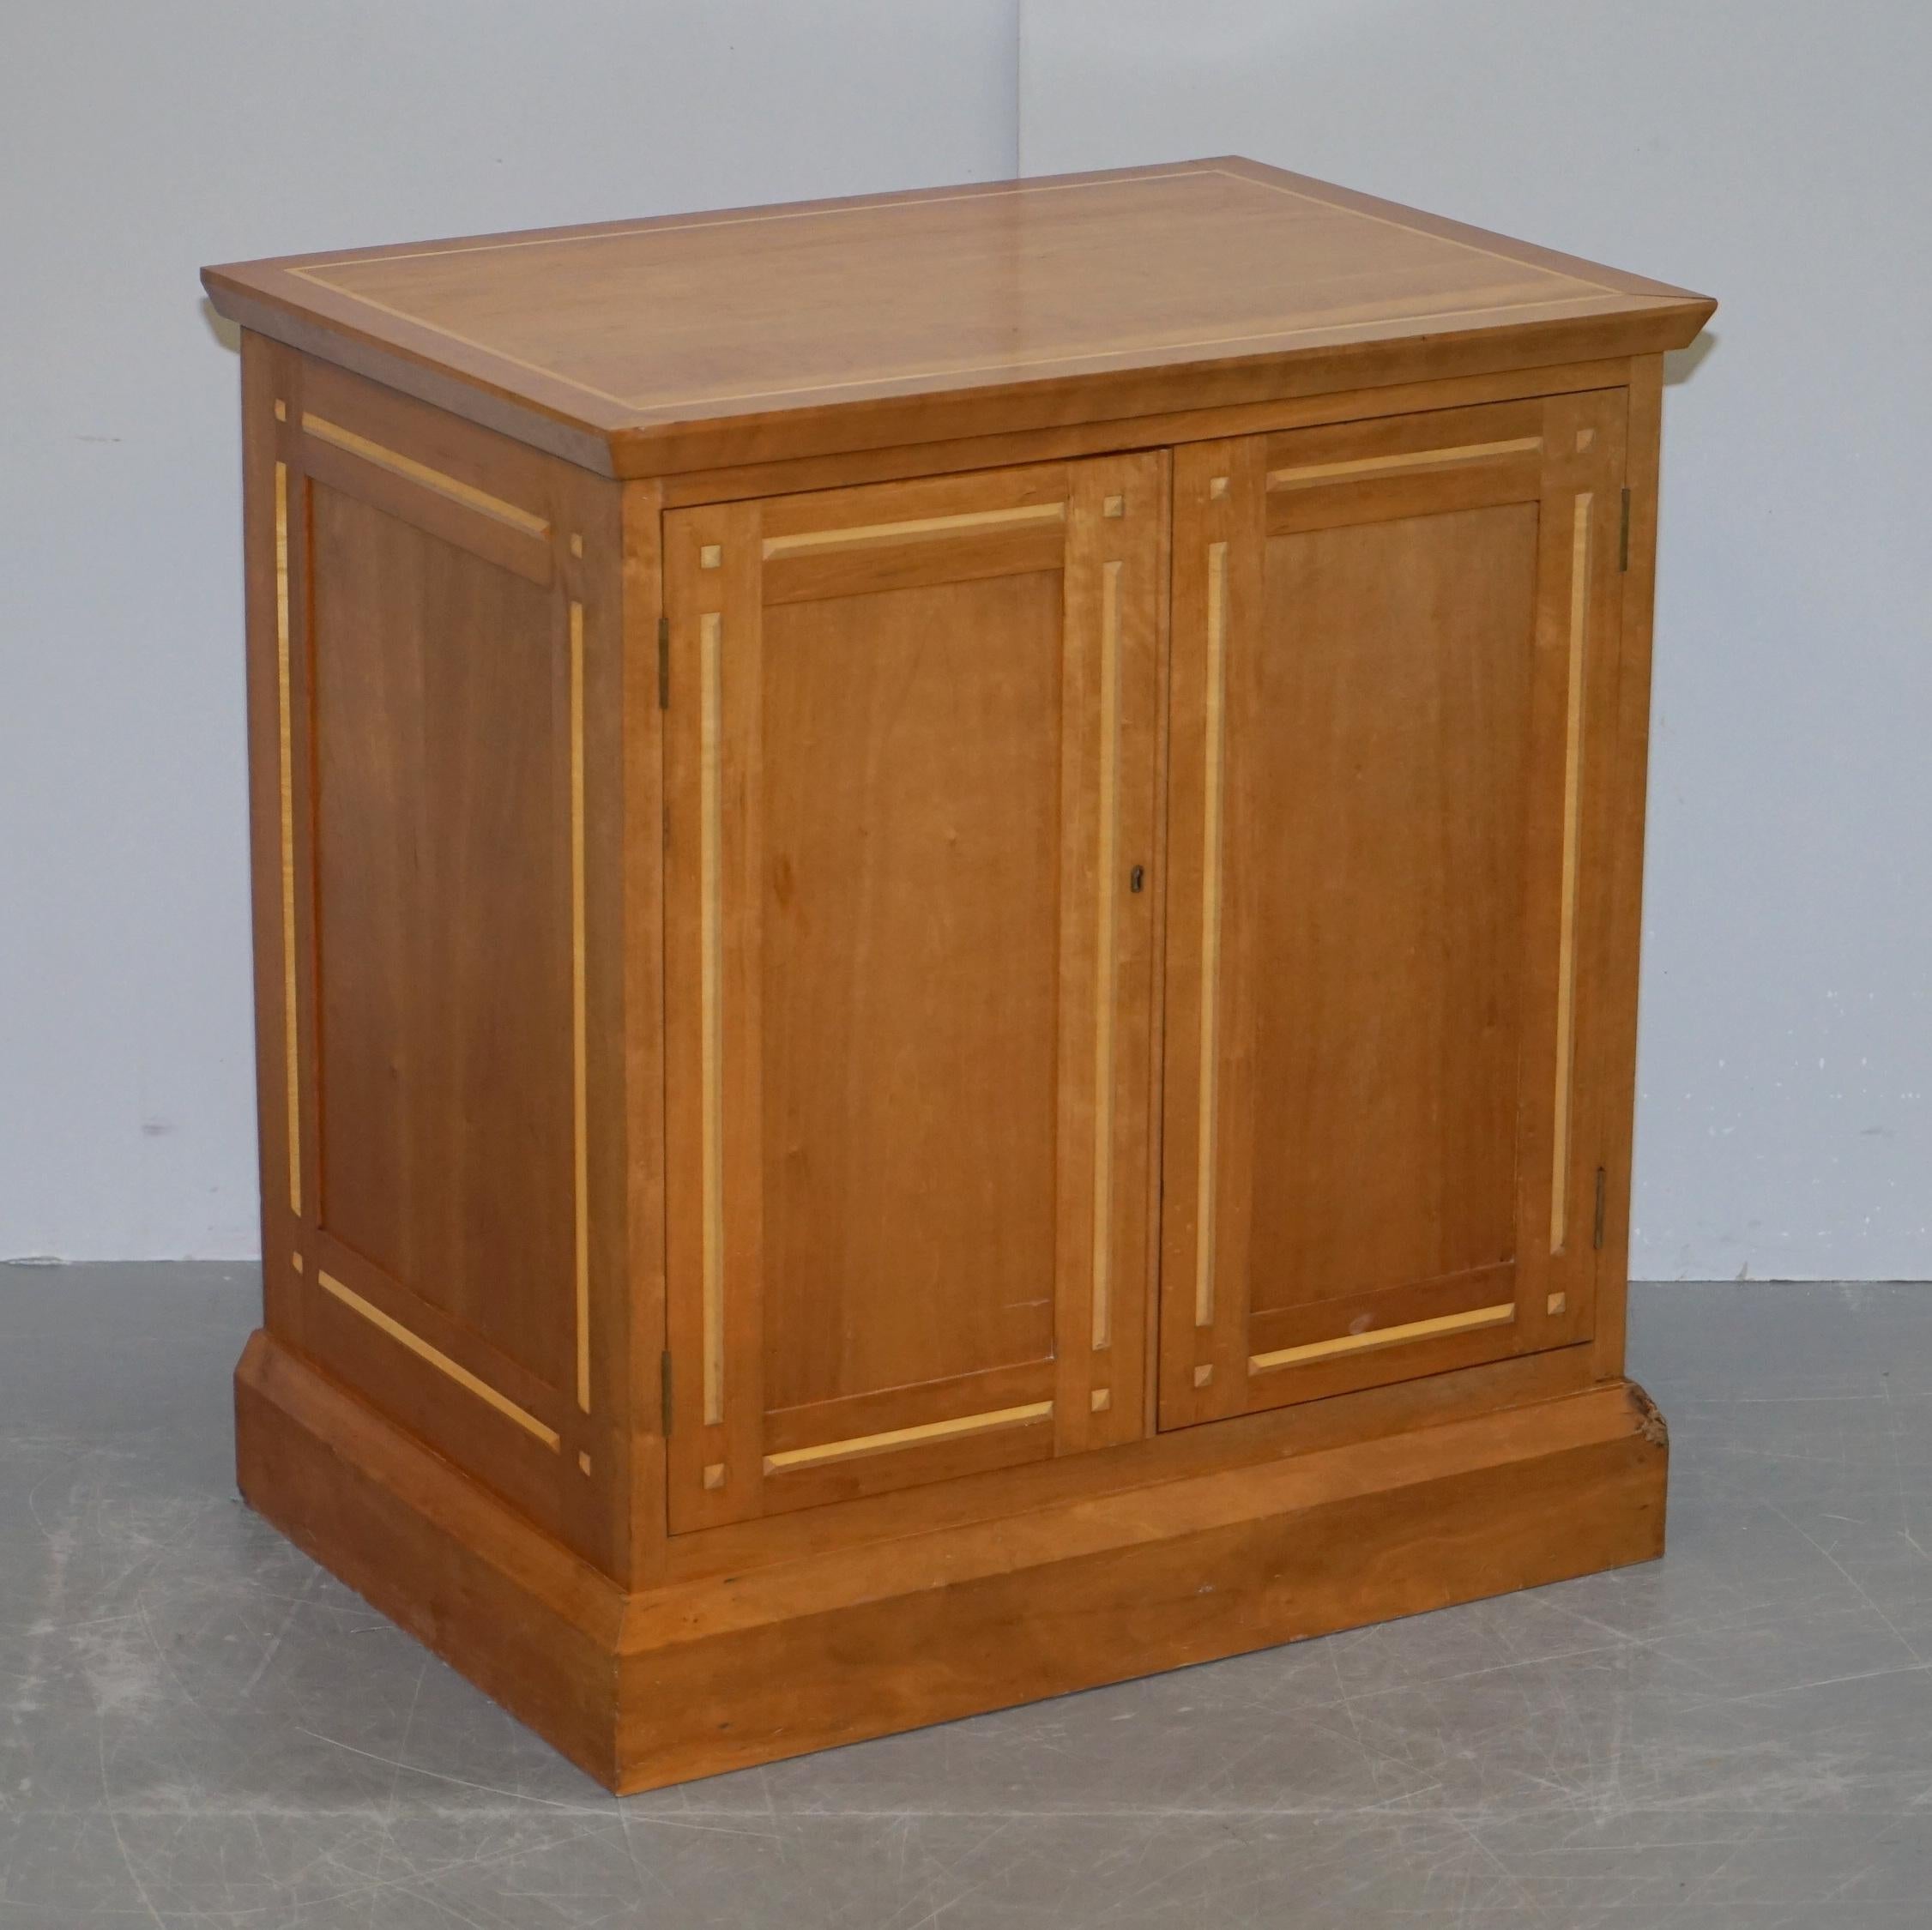 We are delighted to this stunning Satinwood and Walnut cupboard with sliding linen shelves attributed to David Linley

An exquisite looking and very well made piece. This was sold to me as David Linley however I can’t see the paper label on the